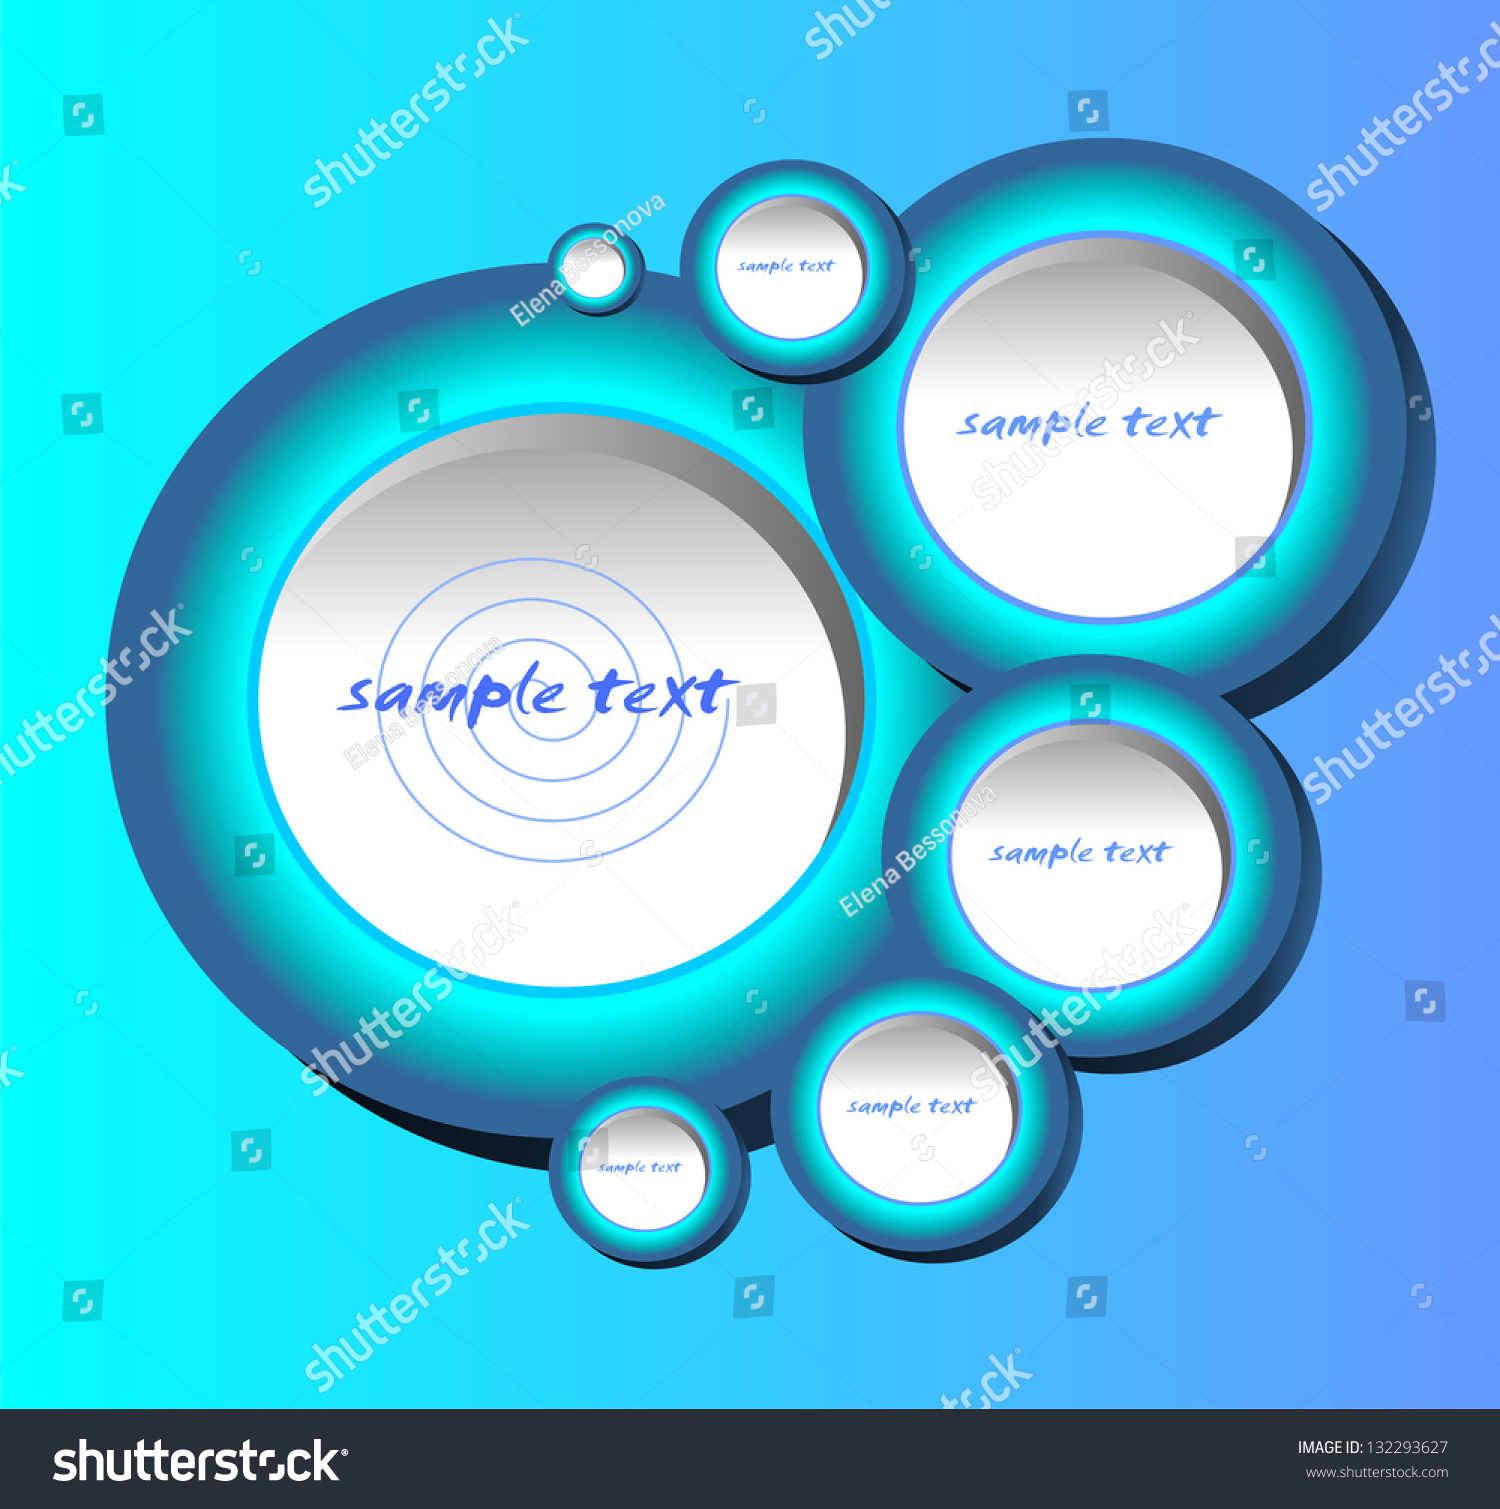 Abstract Vector Shapes - 132293627 : Shutterstock